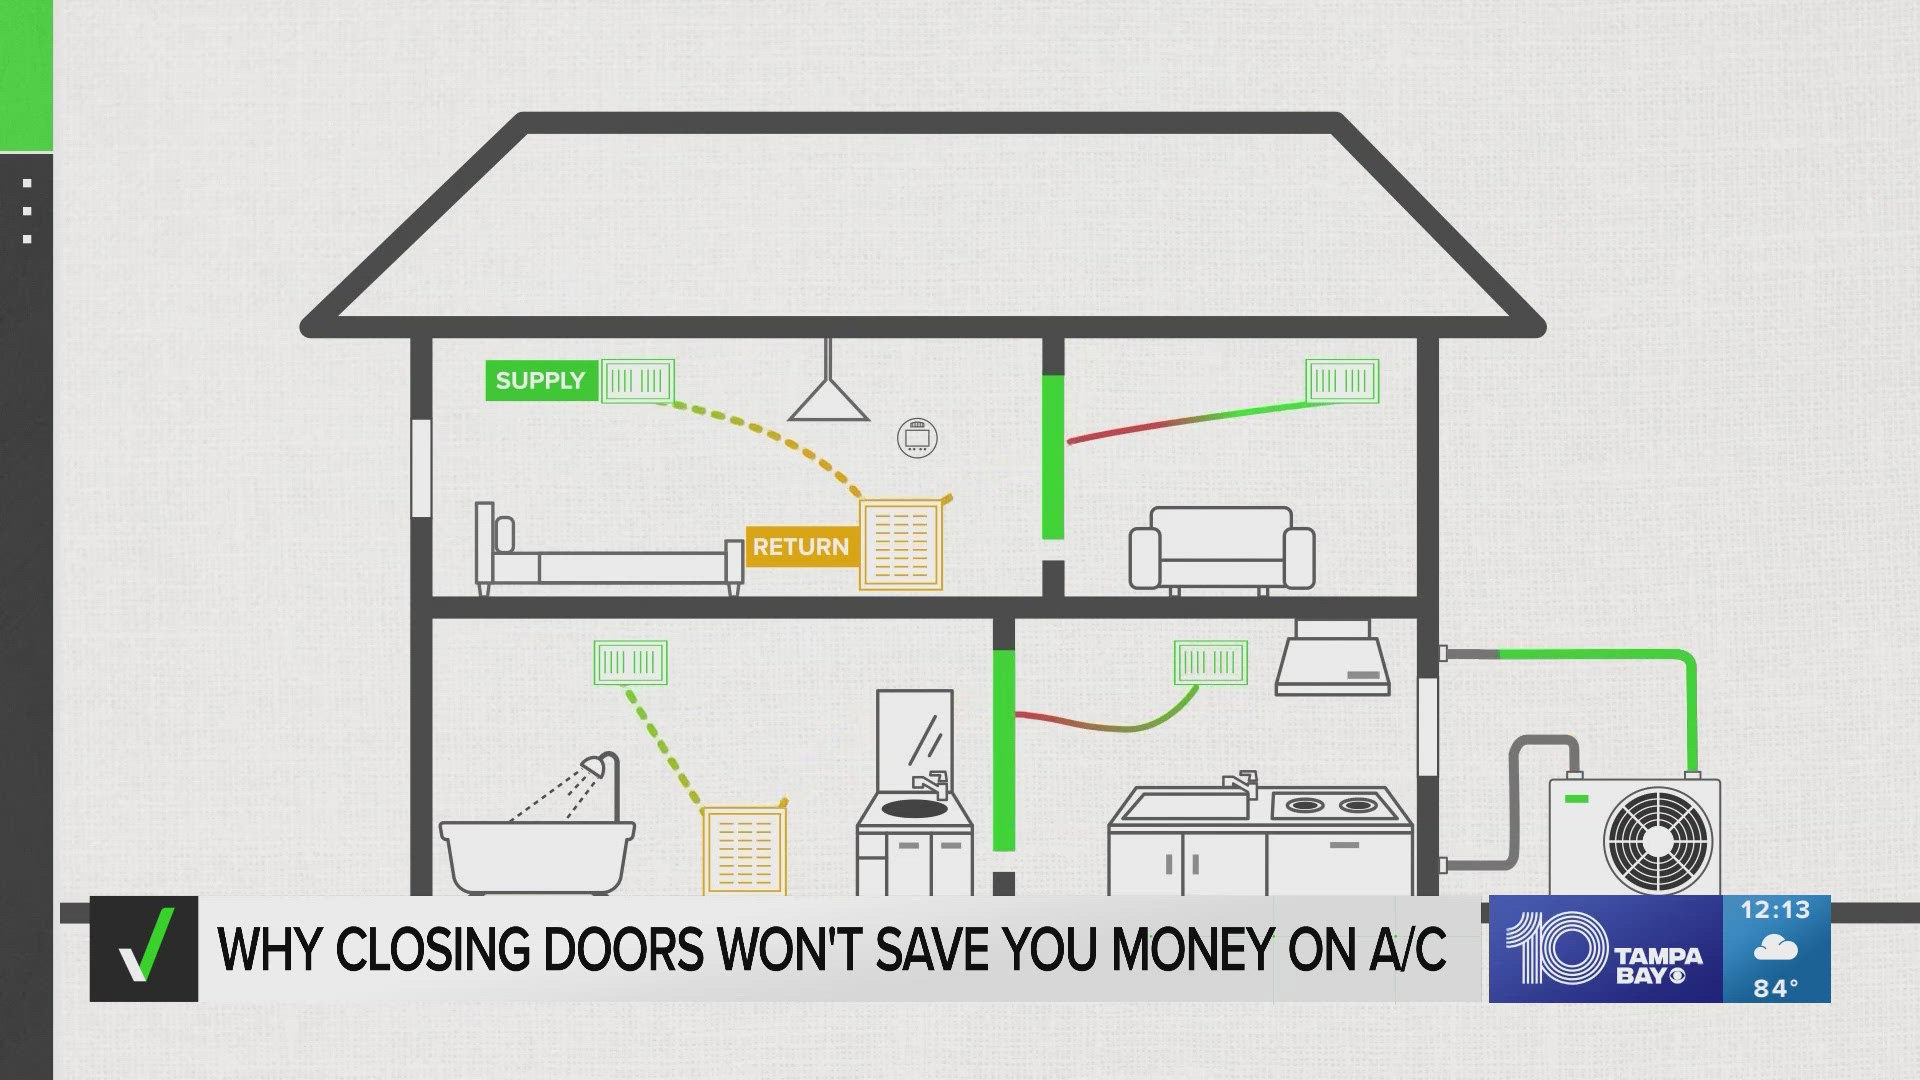 Closing bedroom doors actually puts strain on most central A/C systems, which in turn leads to more expensive utility bills.